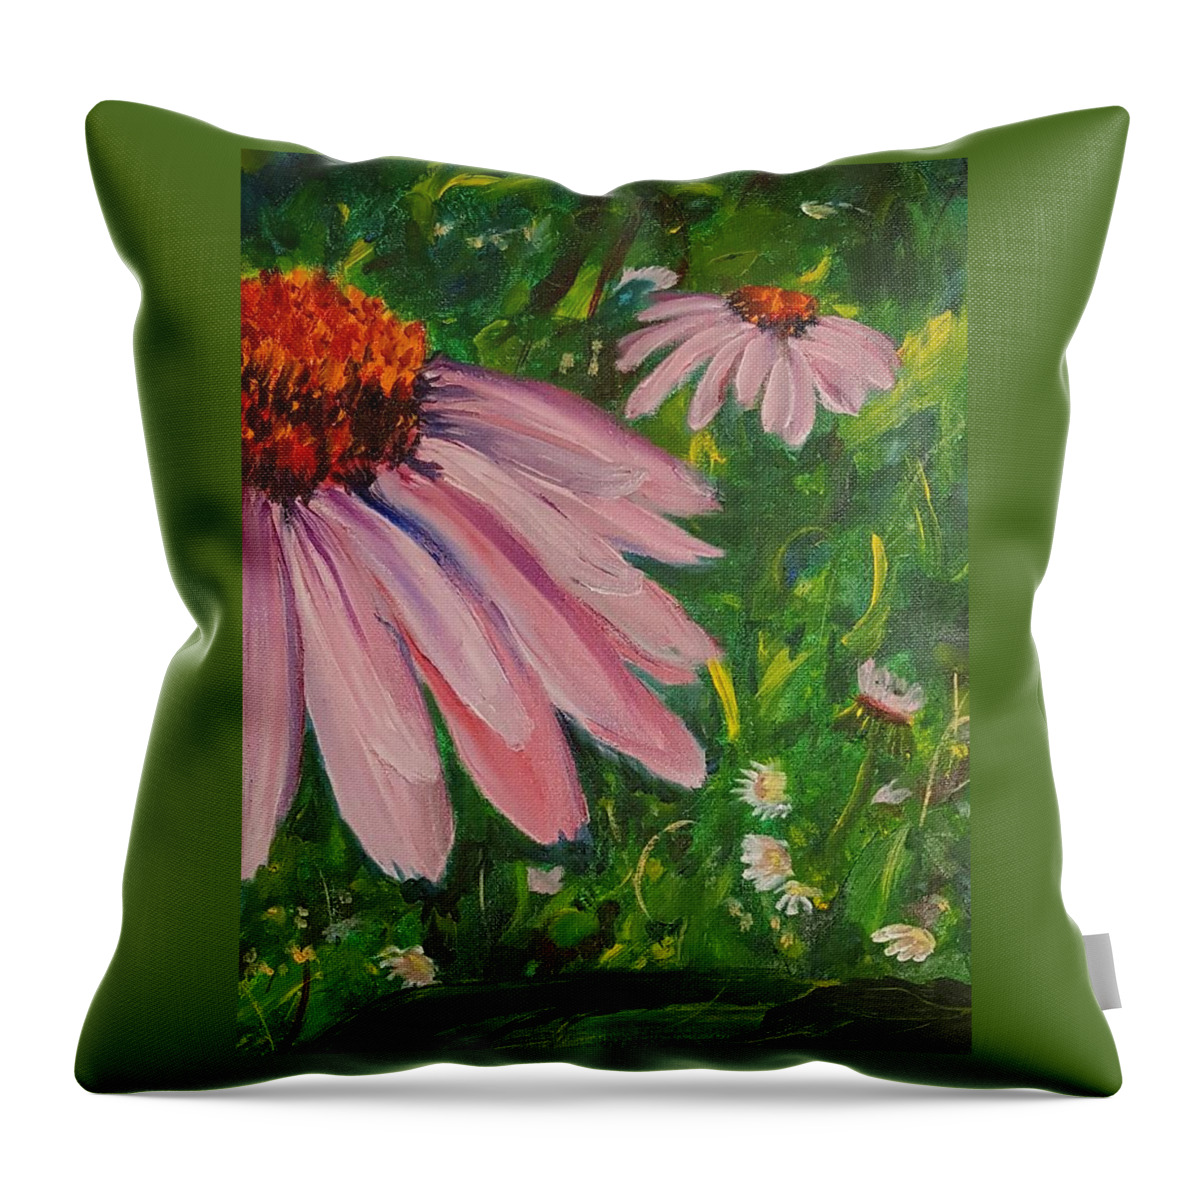 Potent Medicine Throw Pillow featuring the painting Potent Medicine  76 by Cheryl Nancy Ann Gordon